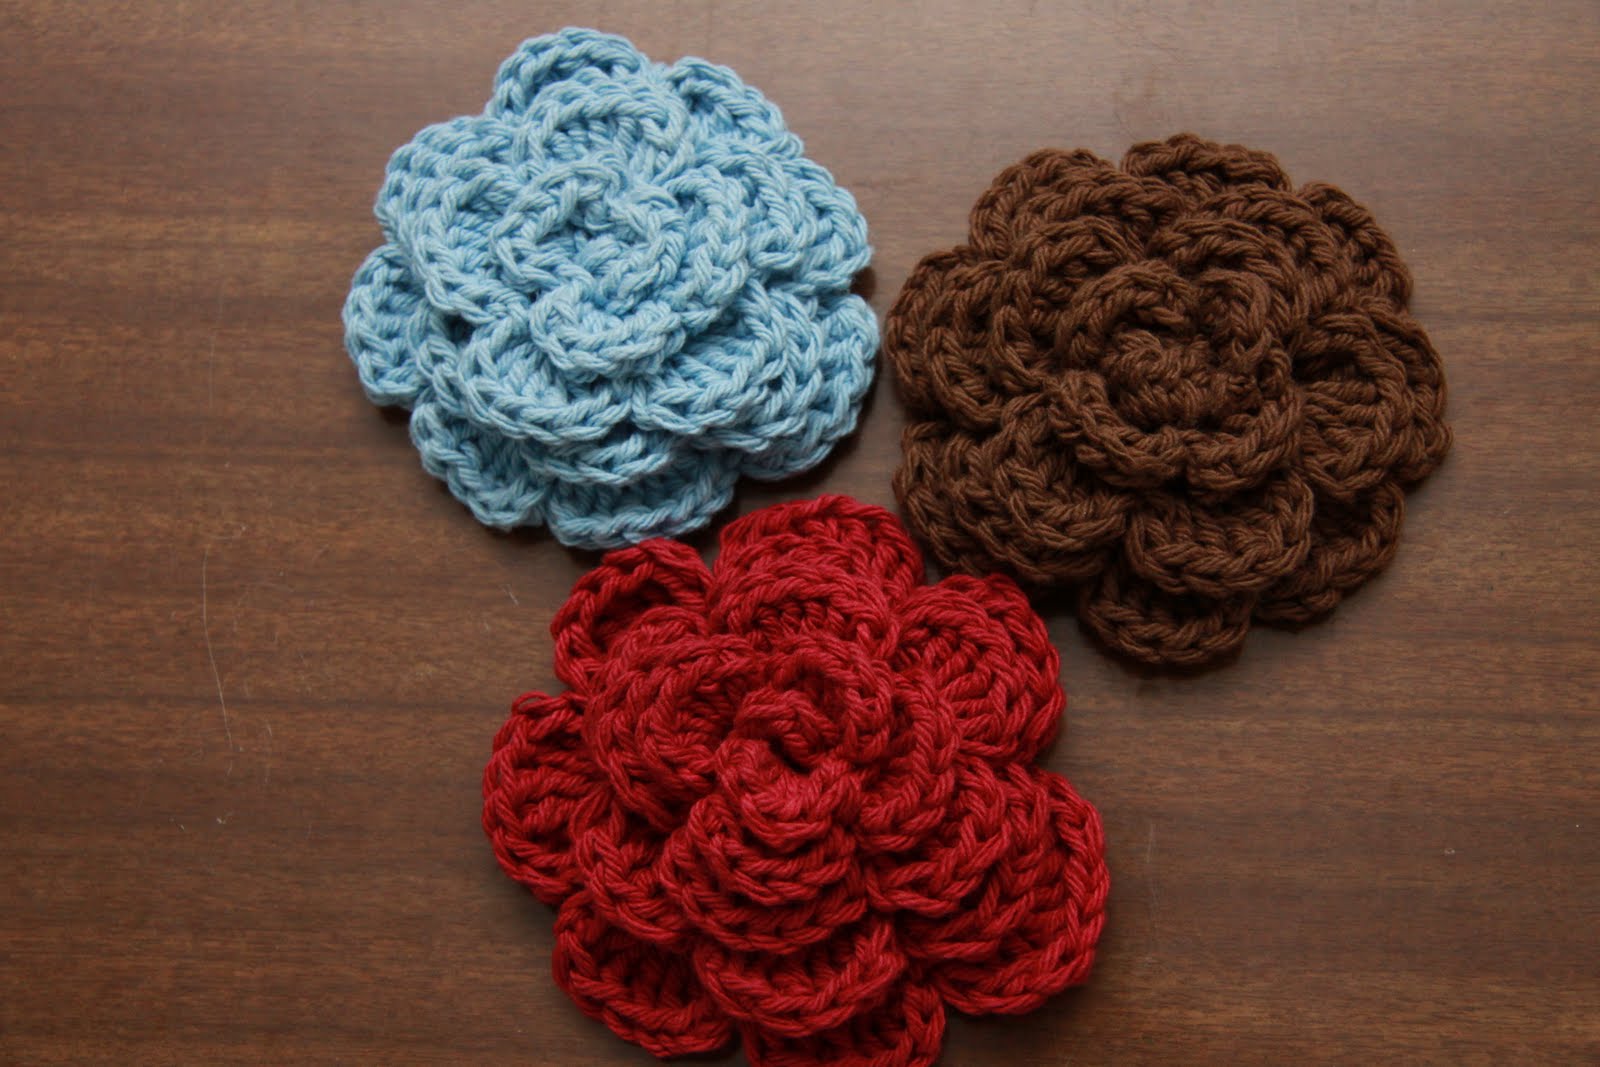 2 Crazy 4 Crafting: Crochet Hair Accessories